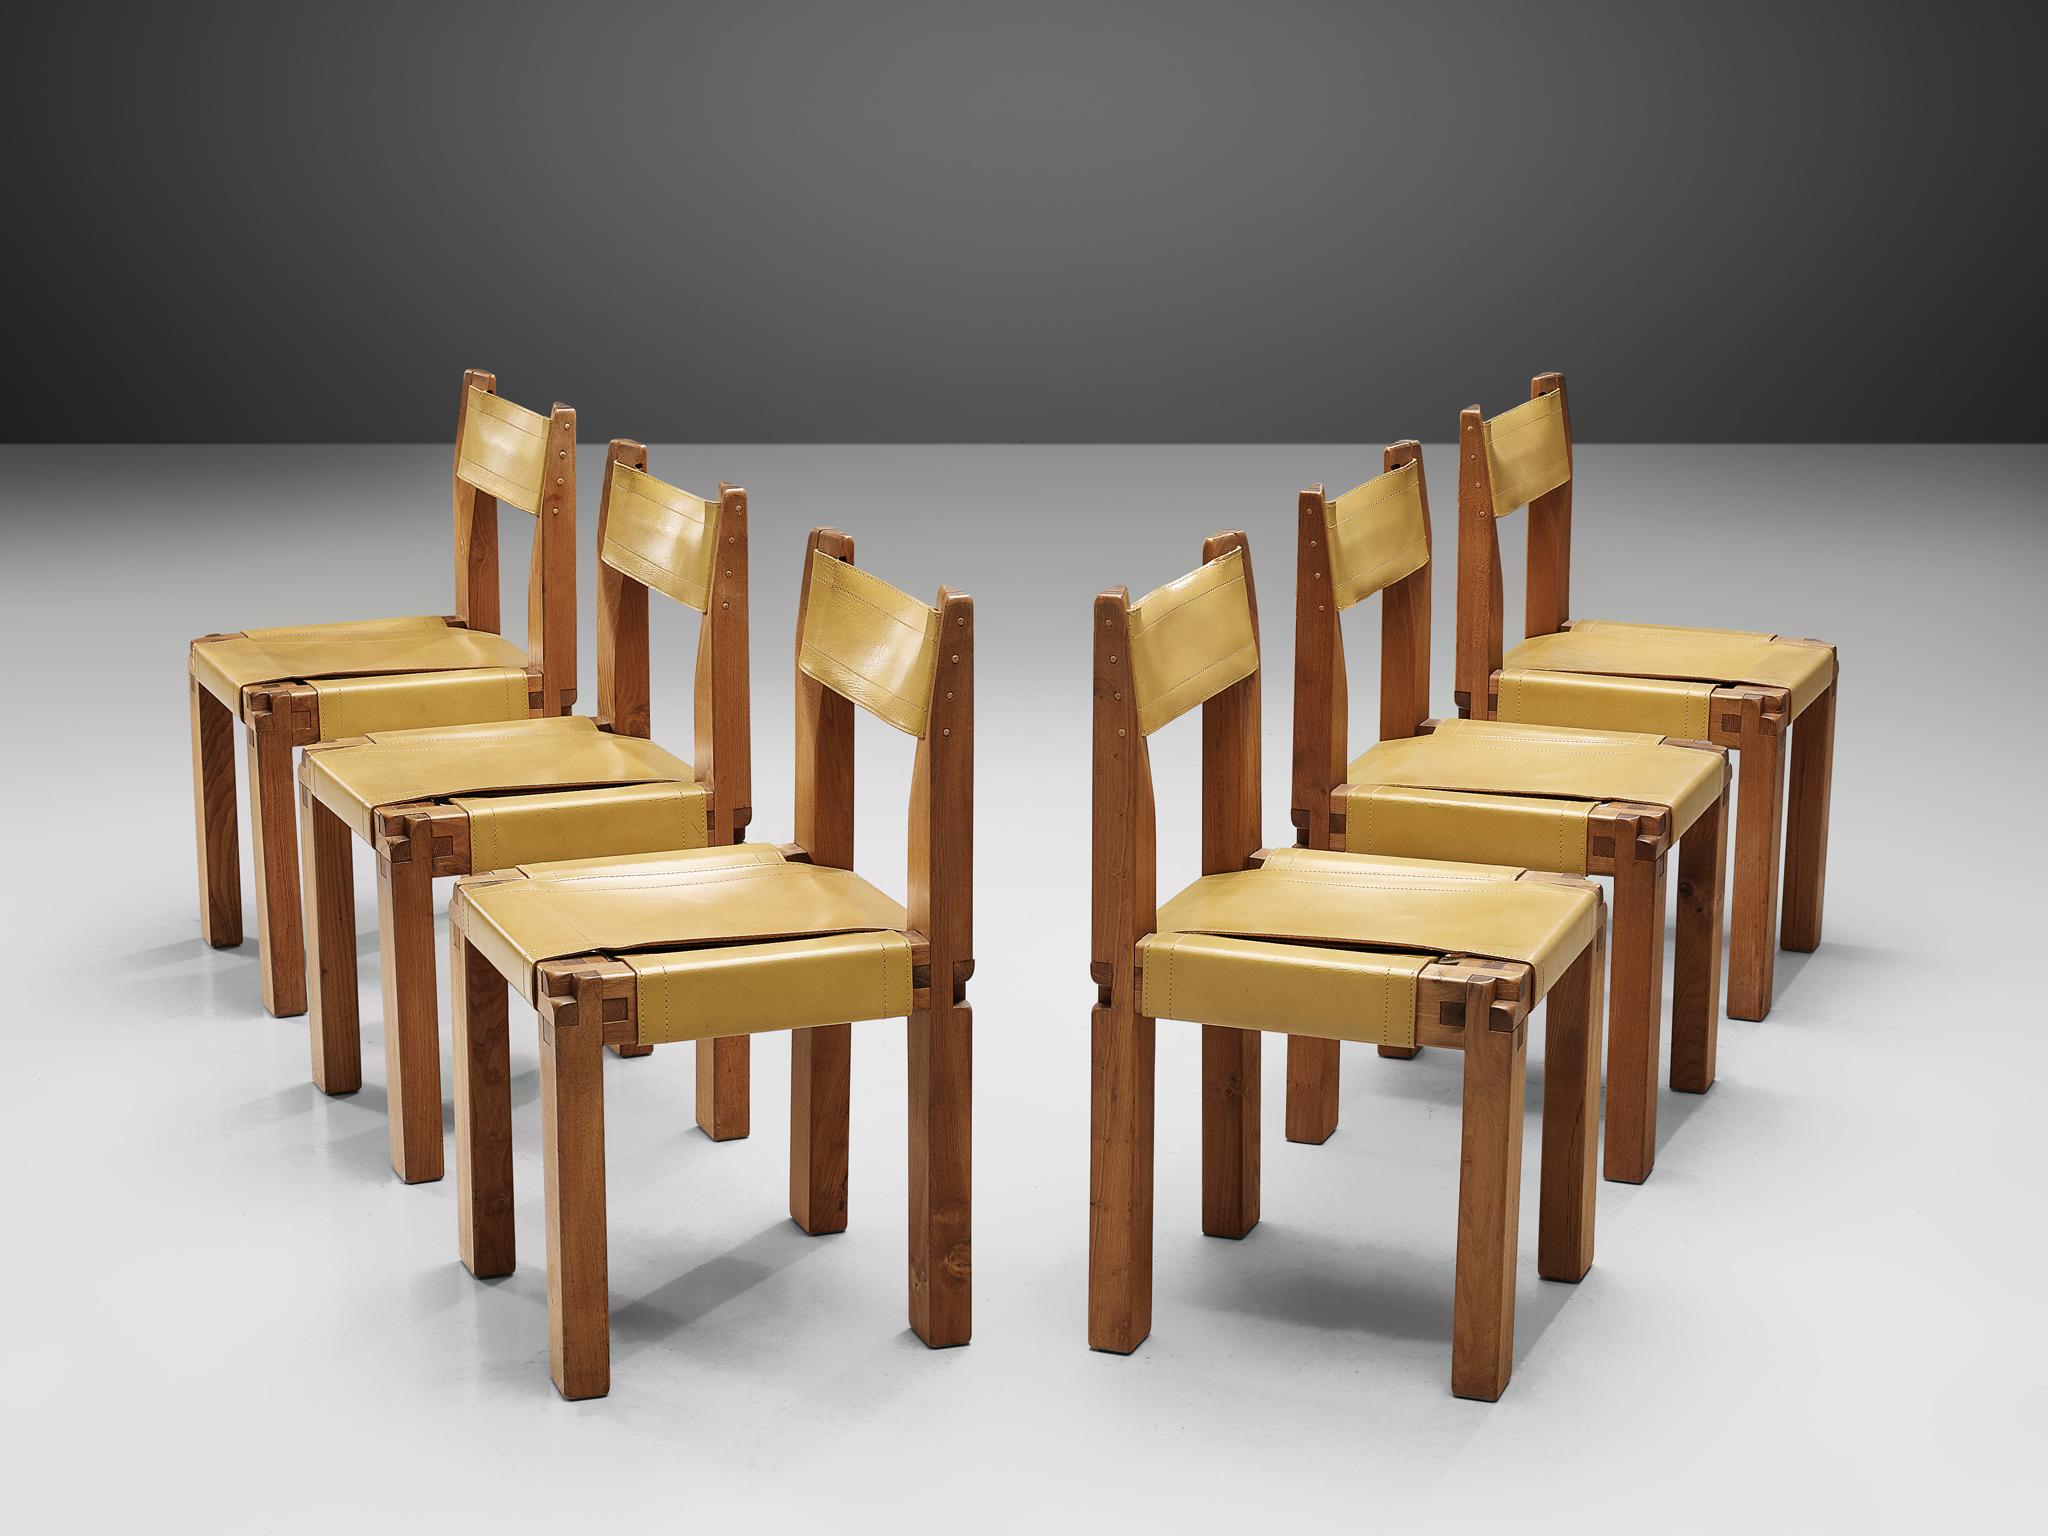 Pierre Chapo, set of six dining chairs, model S11, elm and leather, France, circa 1966.

A set of 6 chairs in solid elmwood with unusual yellow saddle leather seating and back. Designed by French designer Pierre Chapo in Paris. These chairs have a